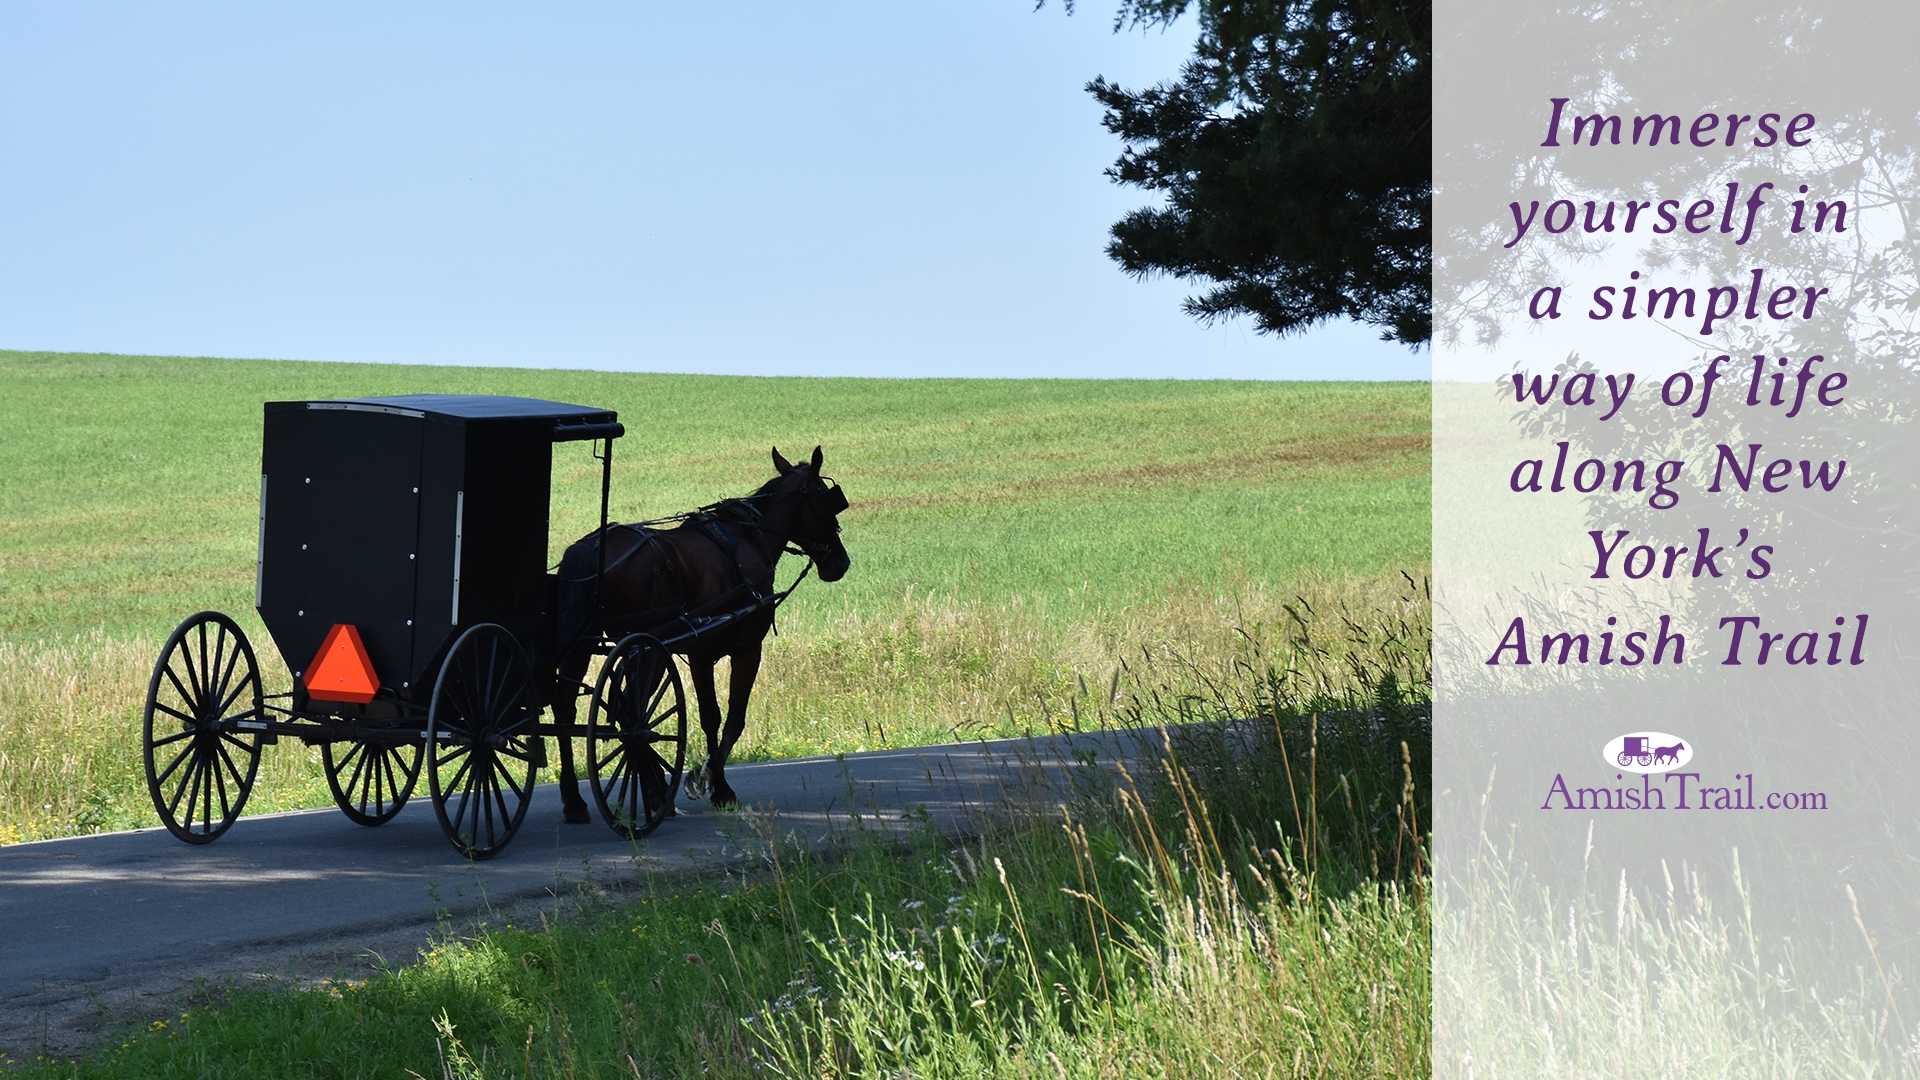 Immerse yourself in a simpler way of life along New York's Amish Trail